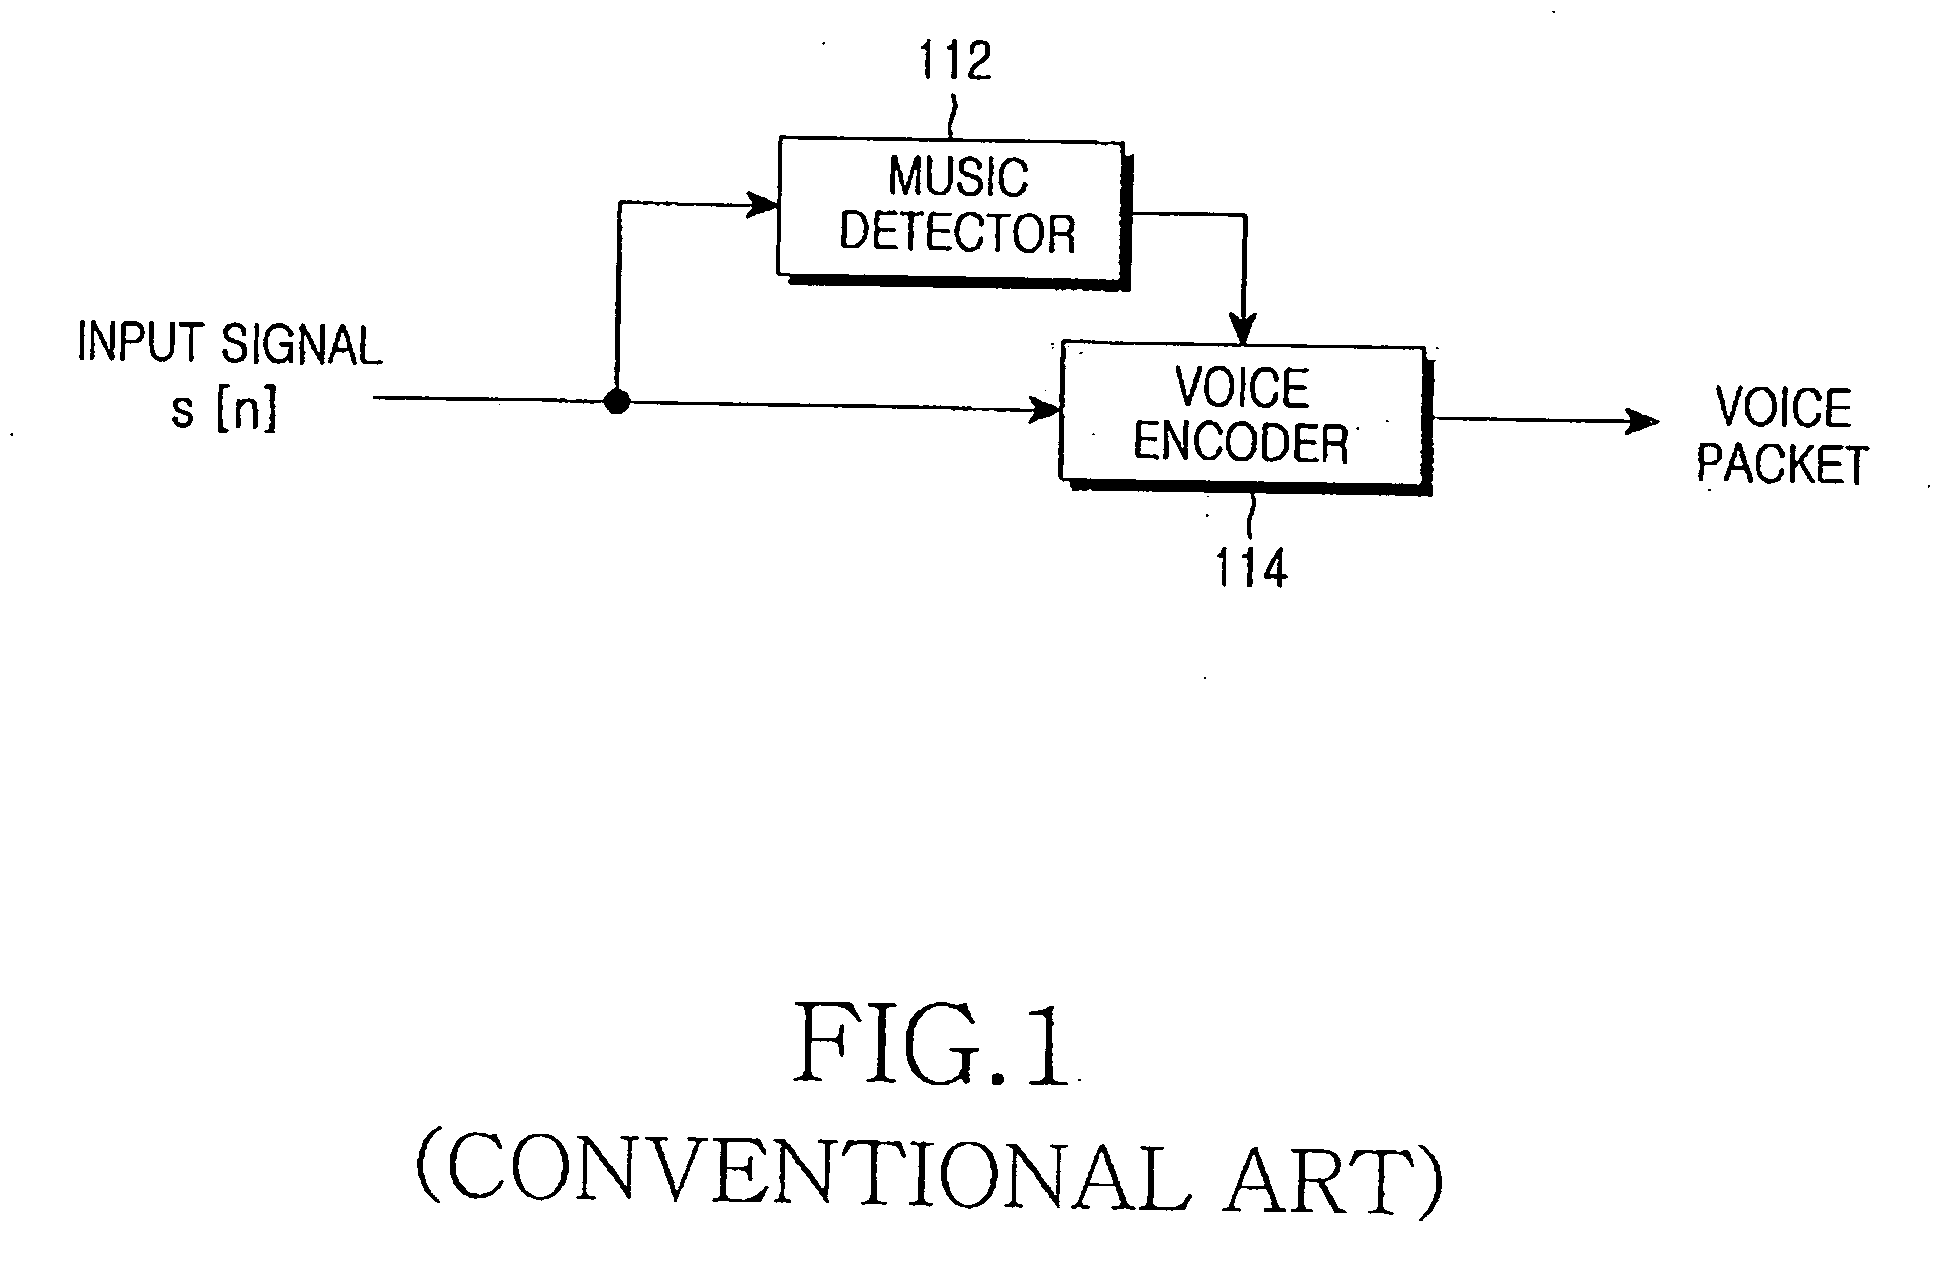 Apparatus and method for transmitting audio signals